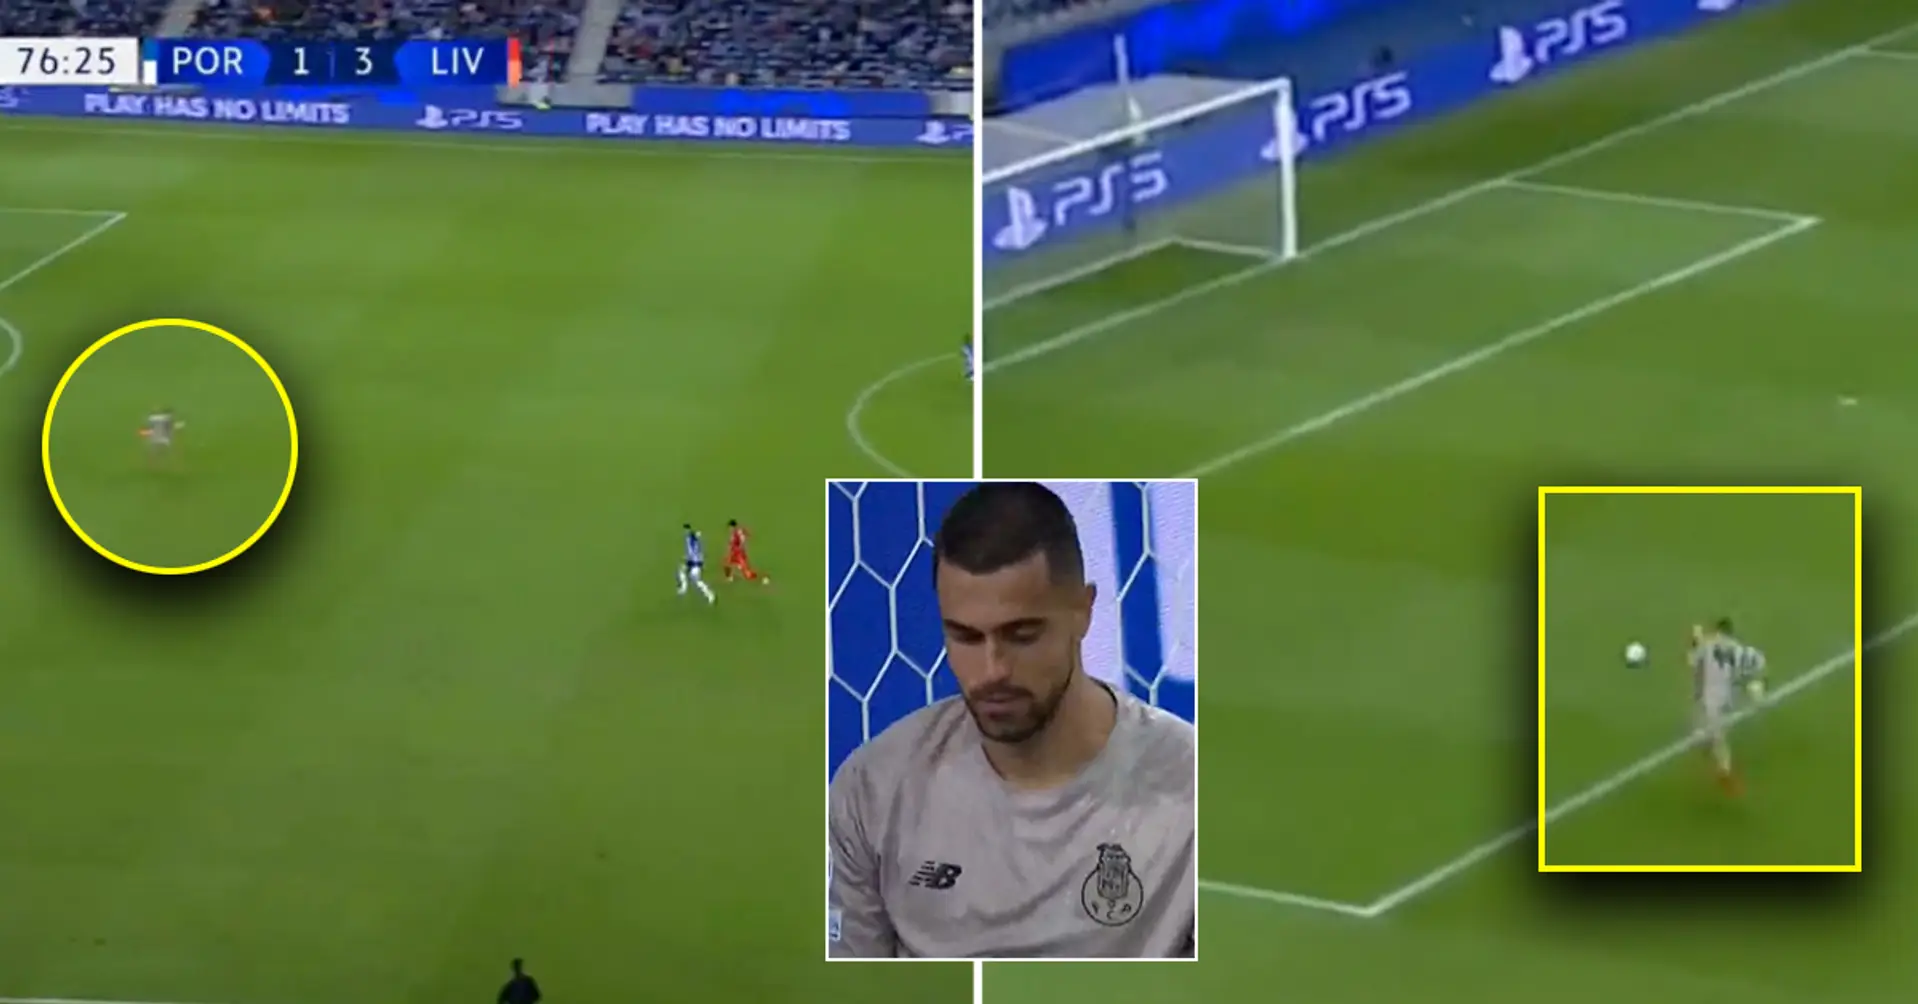 Heartbreaking: Porto goalkeeper ran for 5 seconds trying to catch the ball in front of empty goal